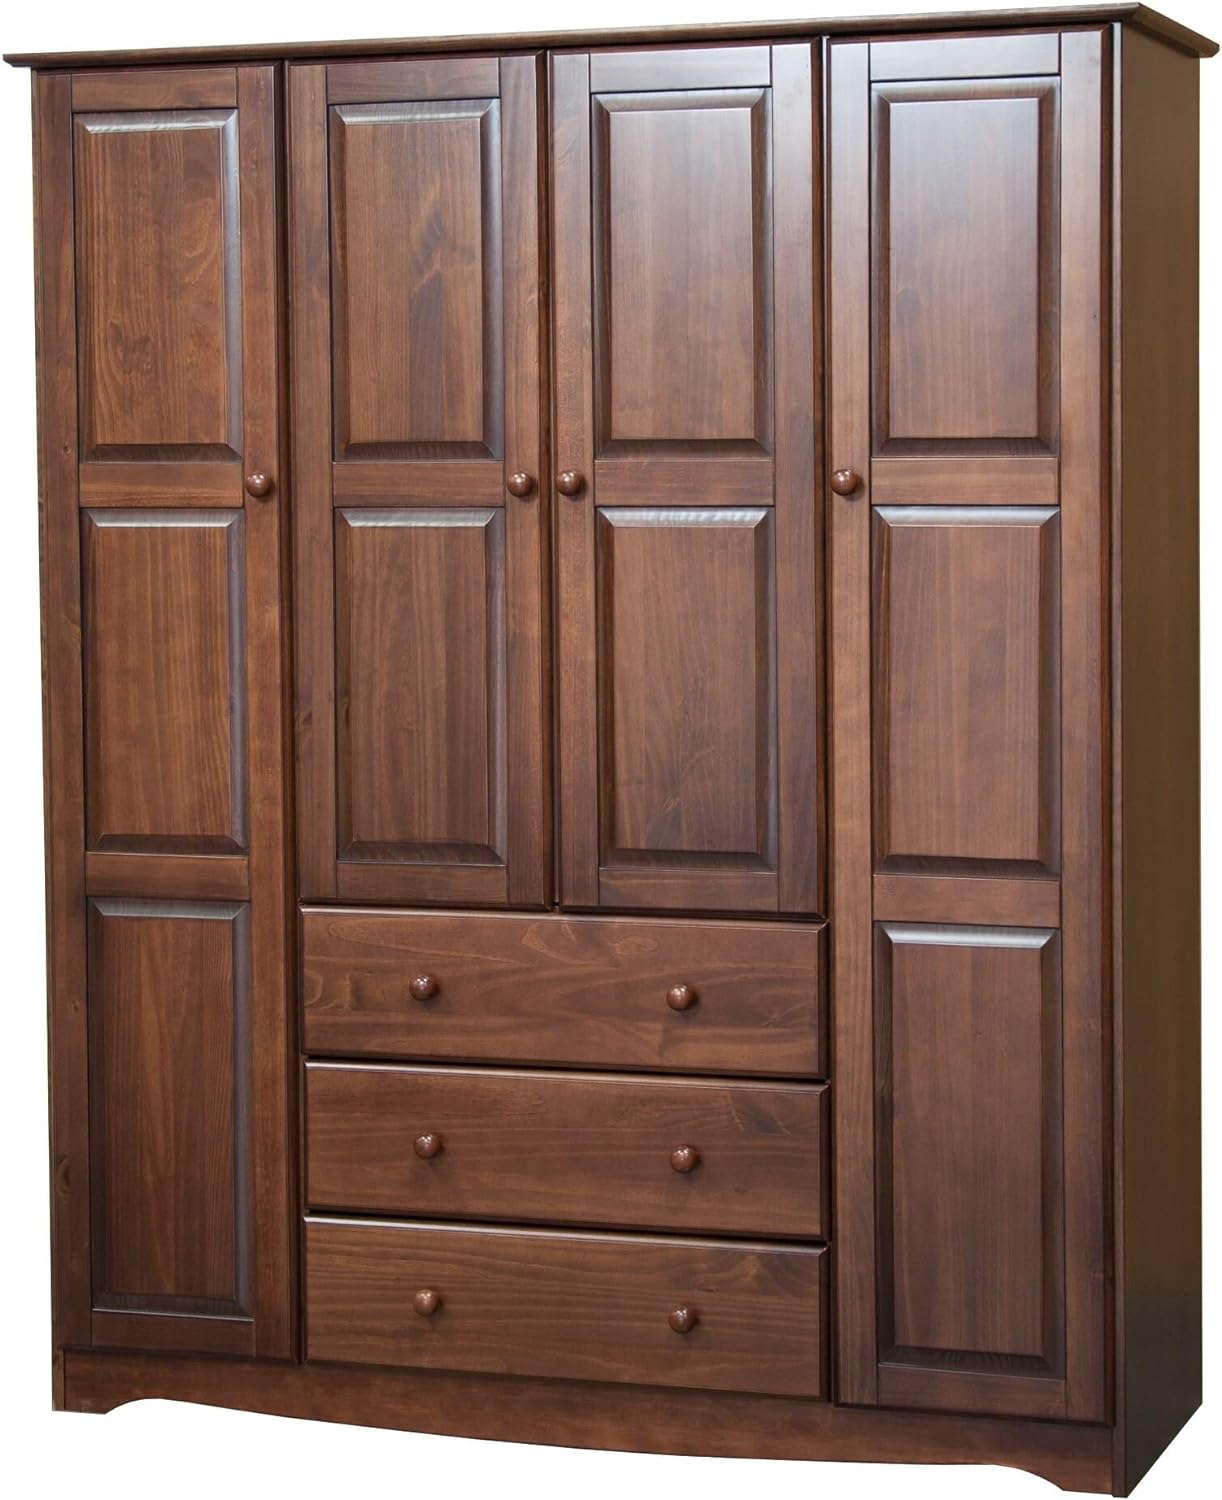 Palace Imports 100% Solid Wood Family Wardrobe Closet/Armoire, Mocha, 3 Clothing Rods Included, 60.25 w x 72 h x 20.75 d, Renewable Eco-Friendly Wood, Made in Brazil